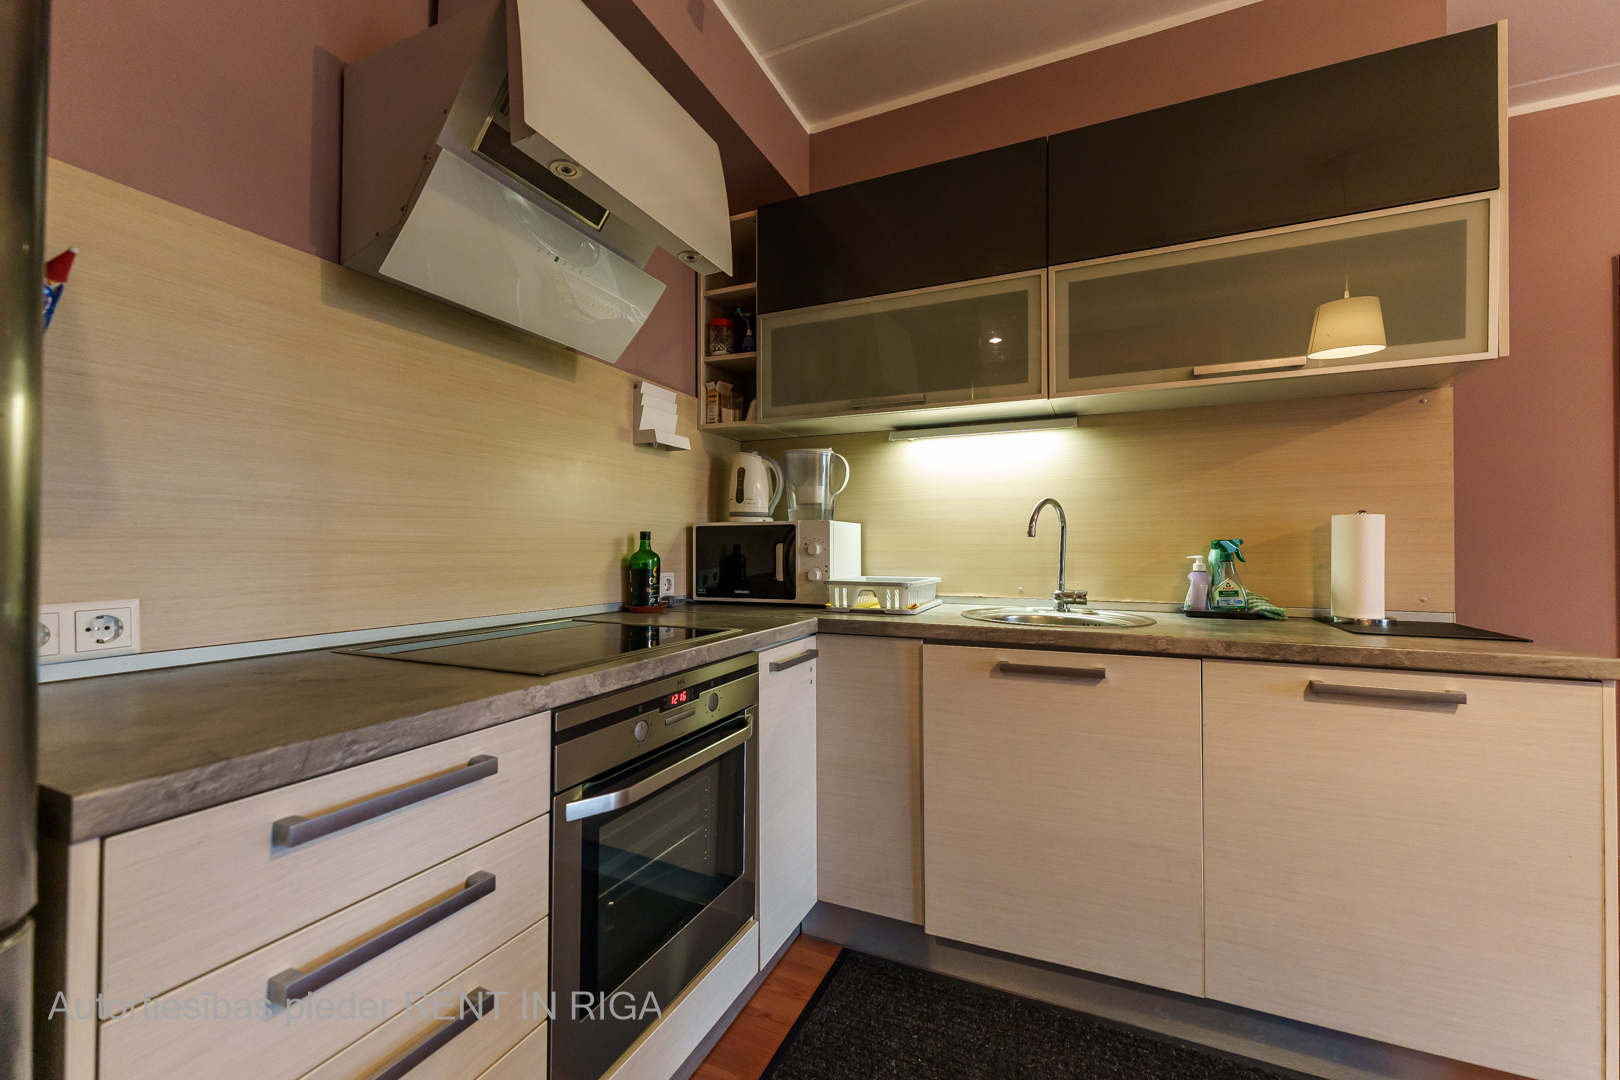 Apartment for rent, Kuldīgas street 37a - Image 1